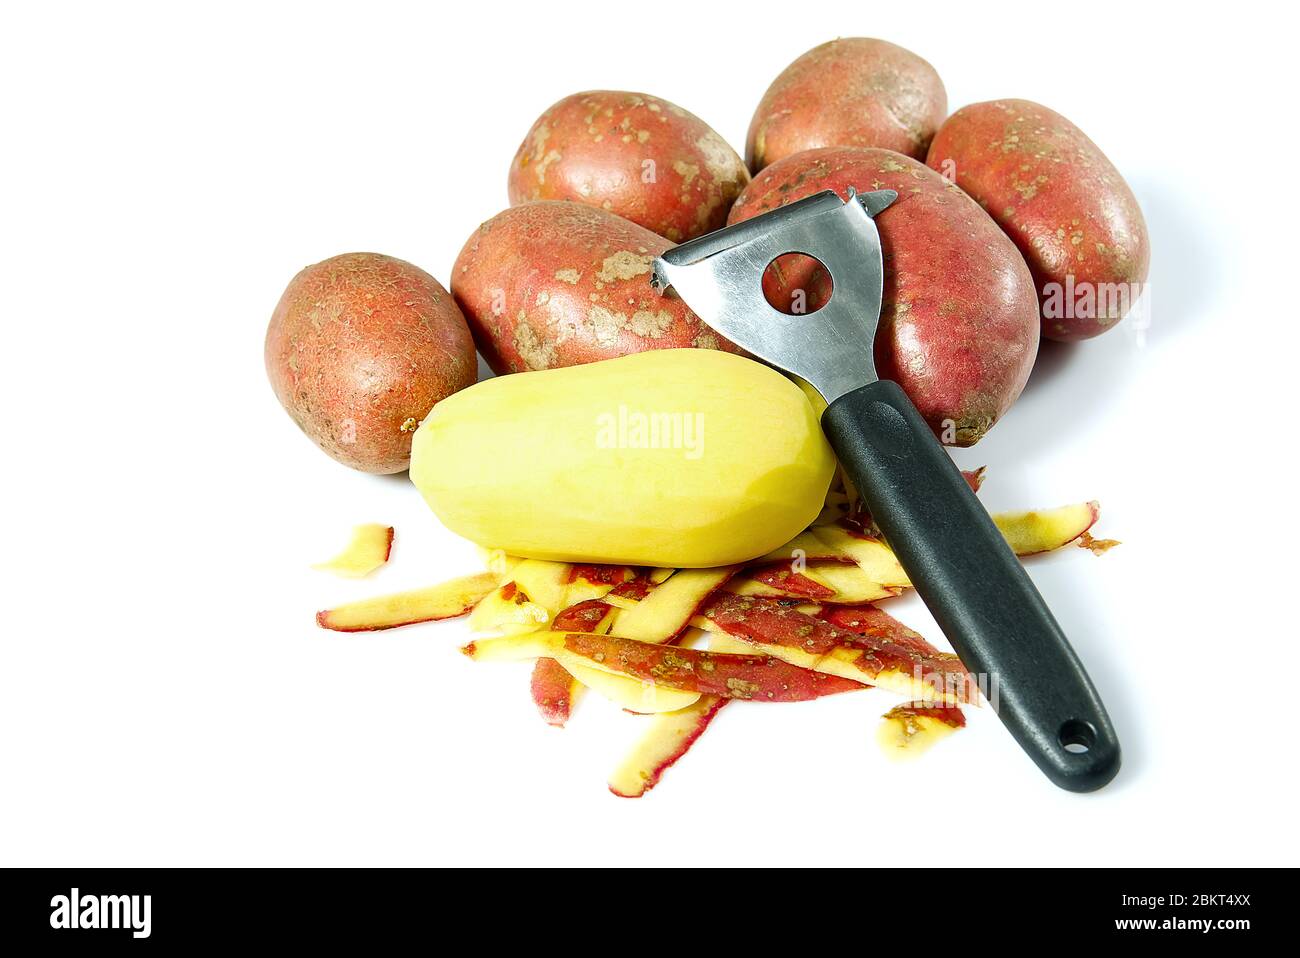 Peeler isolated Cut Out Stock Images & Pictures - Page 2 - Alamy